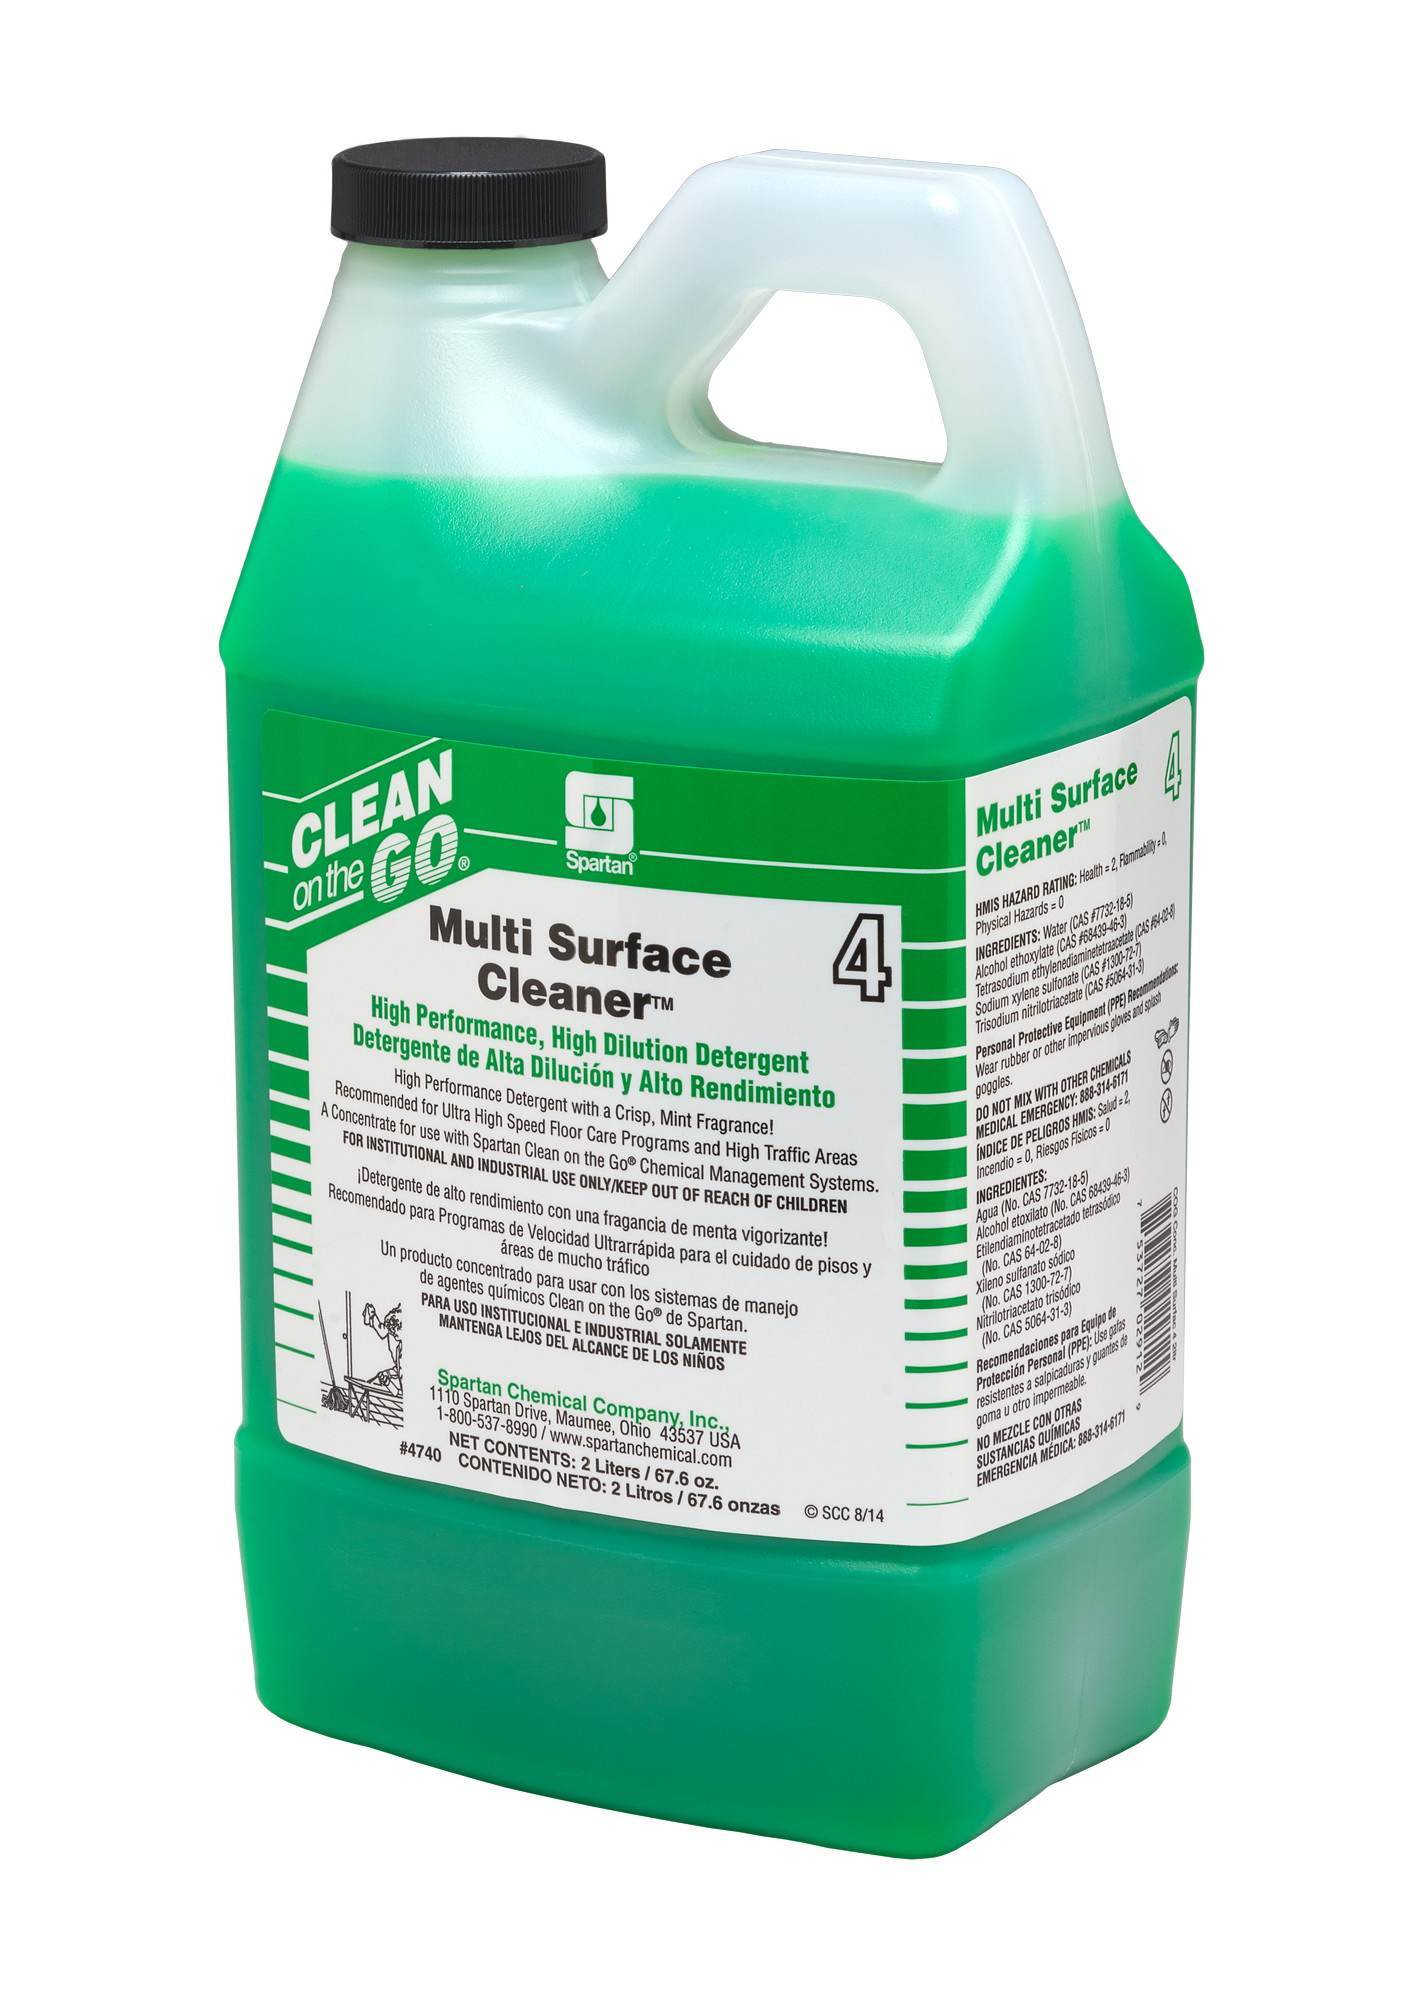 Spartan Chemical Company Multi Surface Cleaner 4, 2 LITER 4/CS